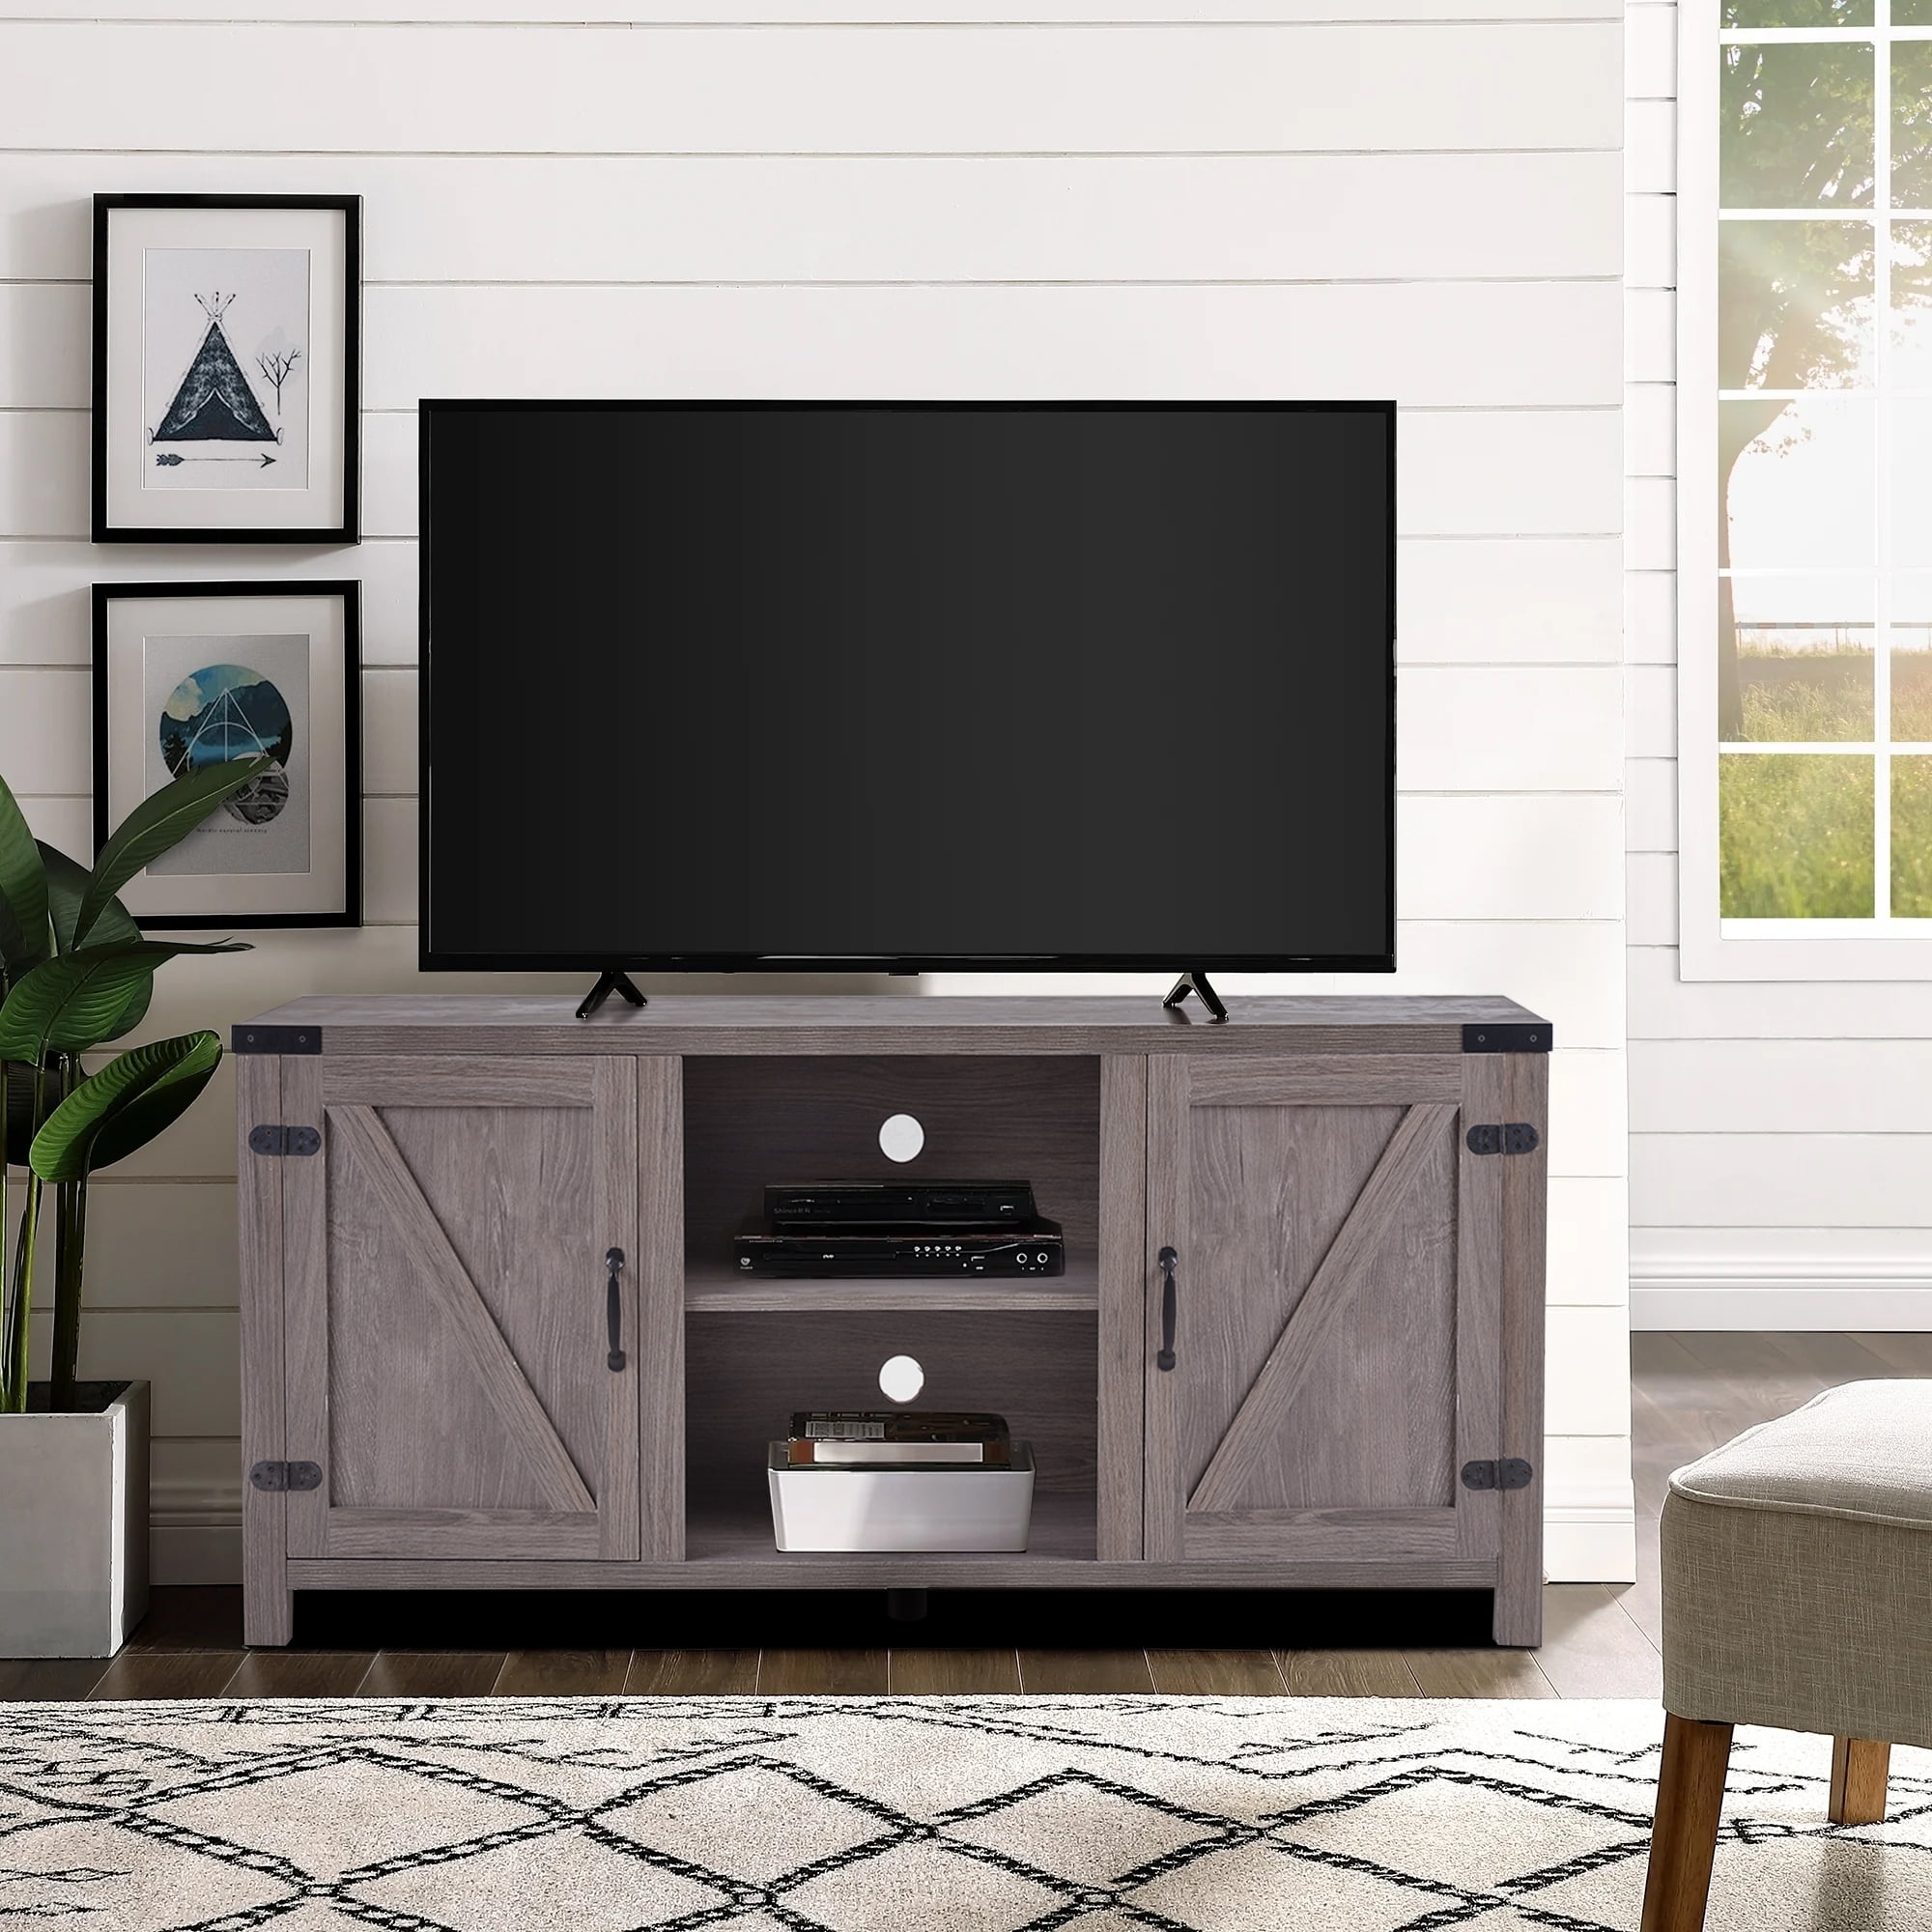 Details about   TV Stand Black For 65 Inch Size Wood Storage Drawer Entertainment Center Modern 